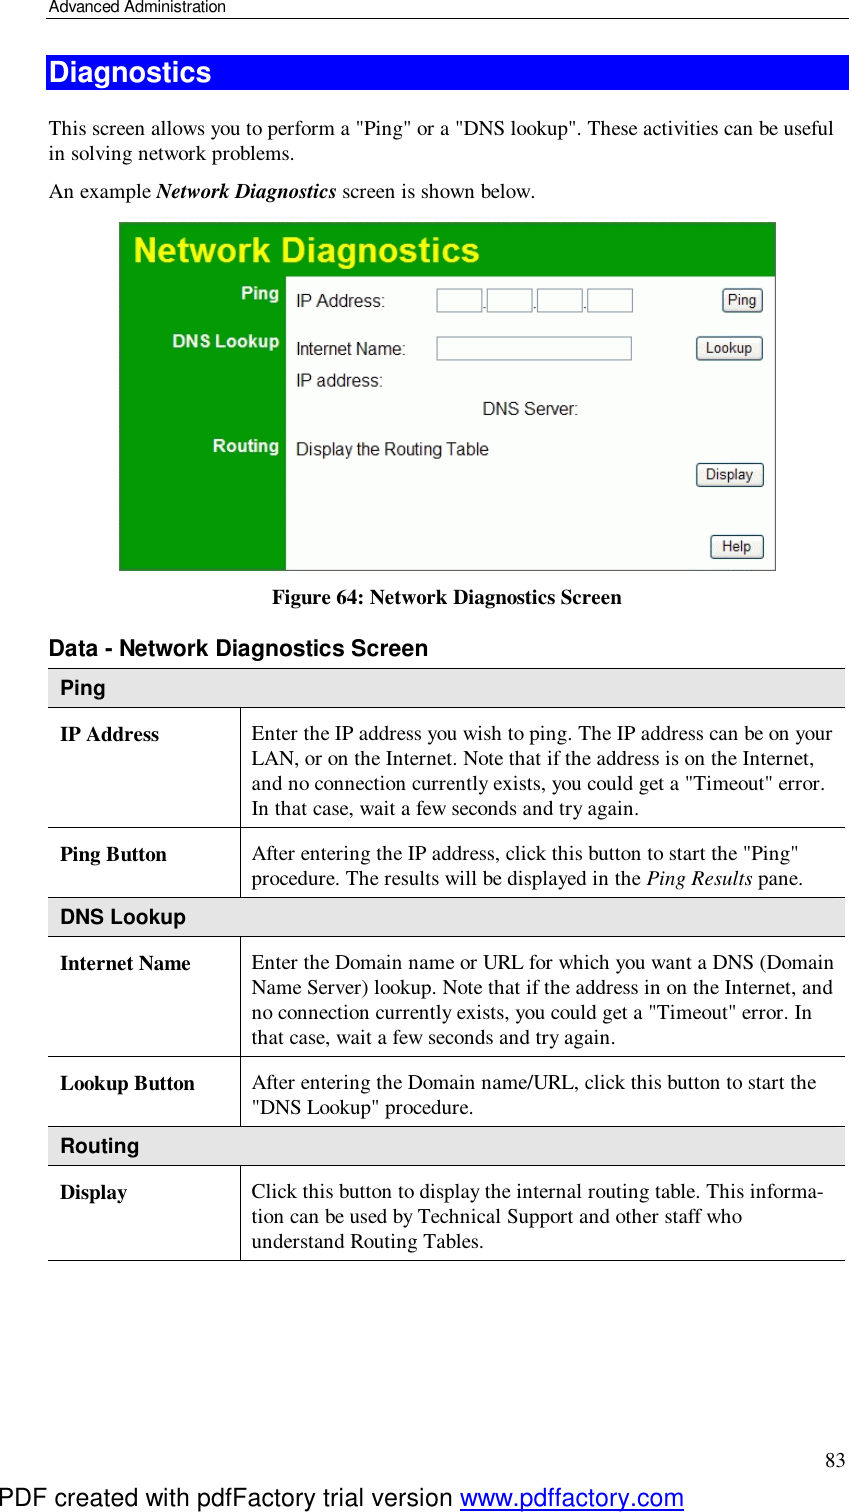 Advanced Administration 83 Diagnostics This screen allows you to perform a &quot;Ping&quot; or a &quot;DNS lookup&quot;. These activities can be useful in solving network problems. An example Network Diagnostics screen is shown below.  Figure 64: Network Diagnostics Screen Data - Network Diagnostics Screen Ping IP Address  Enter the IP address you wish to ping. The IP address can be on your LAN, or on the Internet. Note that if the address is on the Internet, and no connection currently exists, you could get a &quot;Timeout&quot; error. In that case, wait a few seconds and try again. Ping Button  After entering the IP address, click this button to start the &quot;Ping&quot; procedure. The results will be displayed in the Ping Results pane. DNS Lookup Internet Name  Enter the Domain name or URL for which you want a DNS (Domain Name Server) lookup. Note that if the address in on the Internet, and no connection currently exists, you could get a &quot;Timeout&quot; error. In that case, wait a few seconds and try again. Lookup Button  After entering the Domain name/URL, click this button to start the &quot;DNS Lookup&quot; procedure. Routing Display  Click this button to display the internal routing table. This informa-tion can be used by Technical Support and other staff who understand Routing Tables.   PDF created with pdfFactory trial version www.pdffactory.com